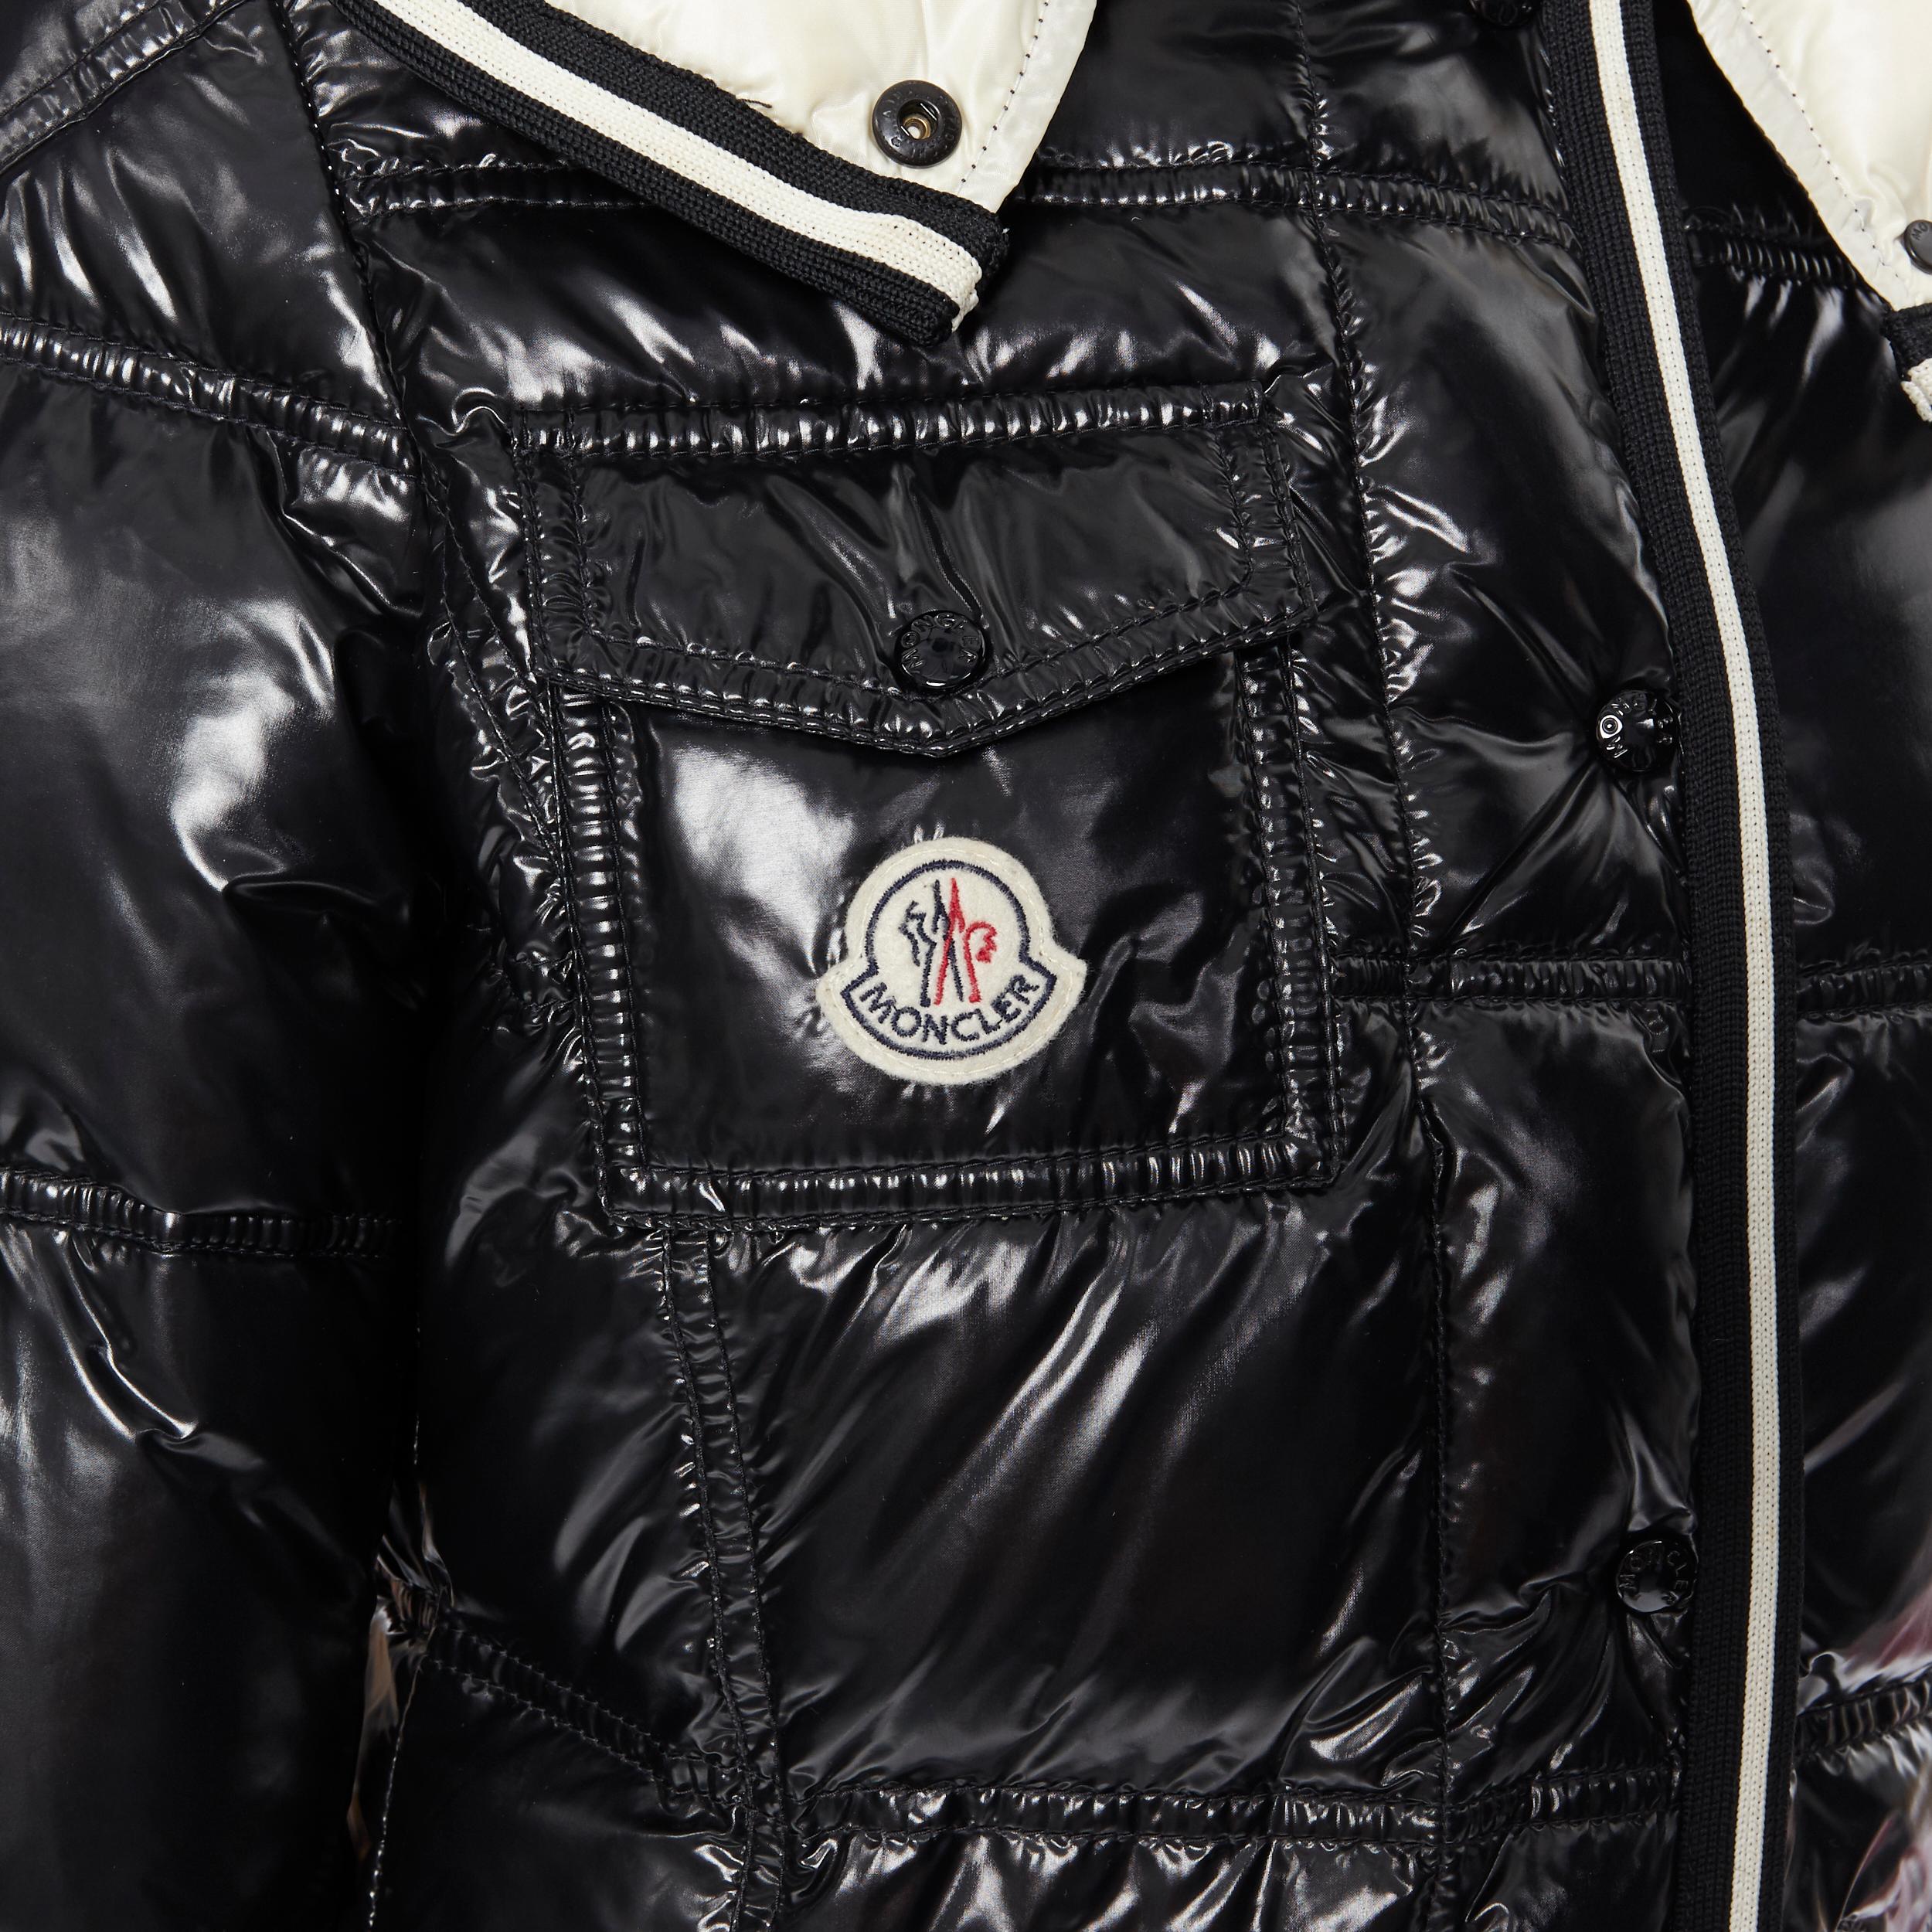 MONCLER black nylon down feather removable hood puffer jacket US0 XS
Brand: Moncler
Model Name / Style: Puffer jacket
Material: Nylon, down
Color: Black, cream
Pattern: Solid
Closure: Button
Extra Detail: Shiney outer. Moncler logo at breast pocket.